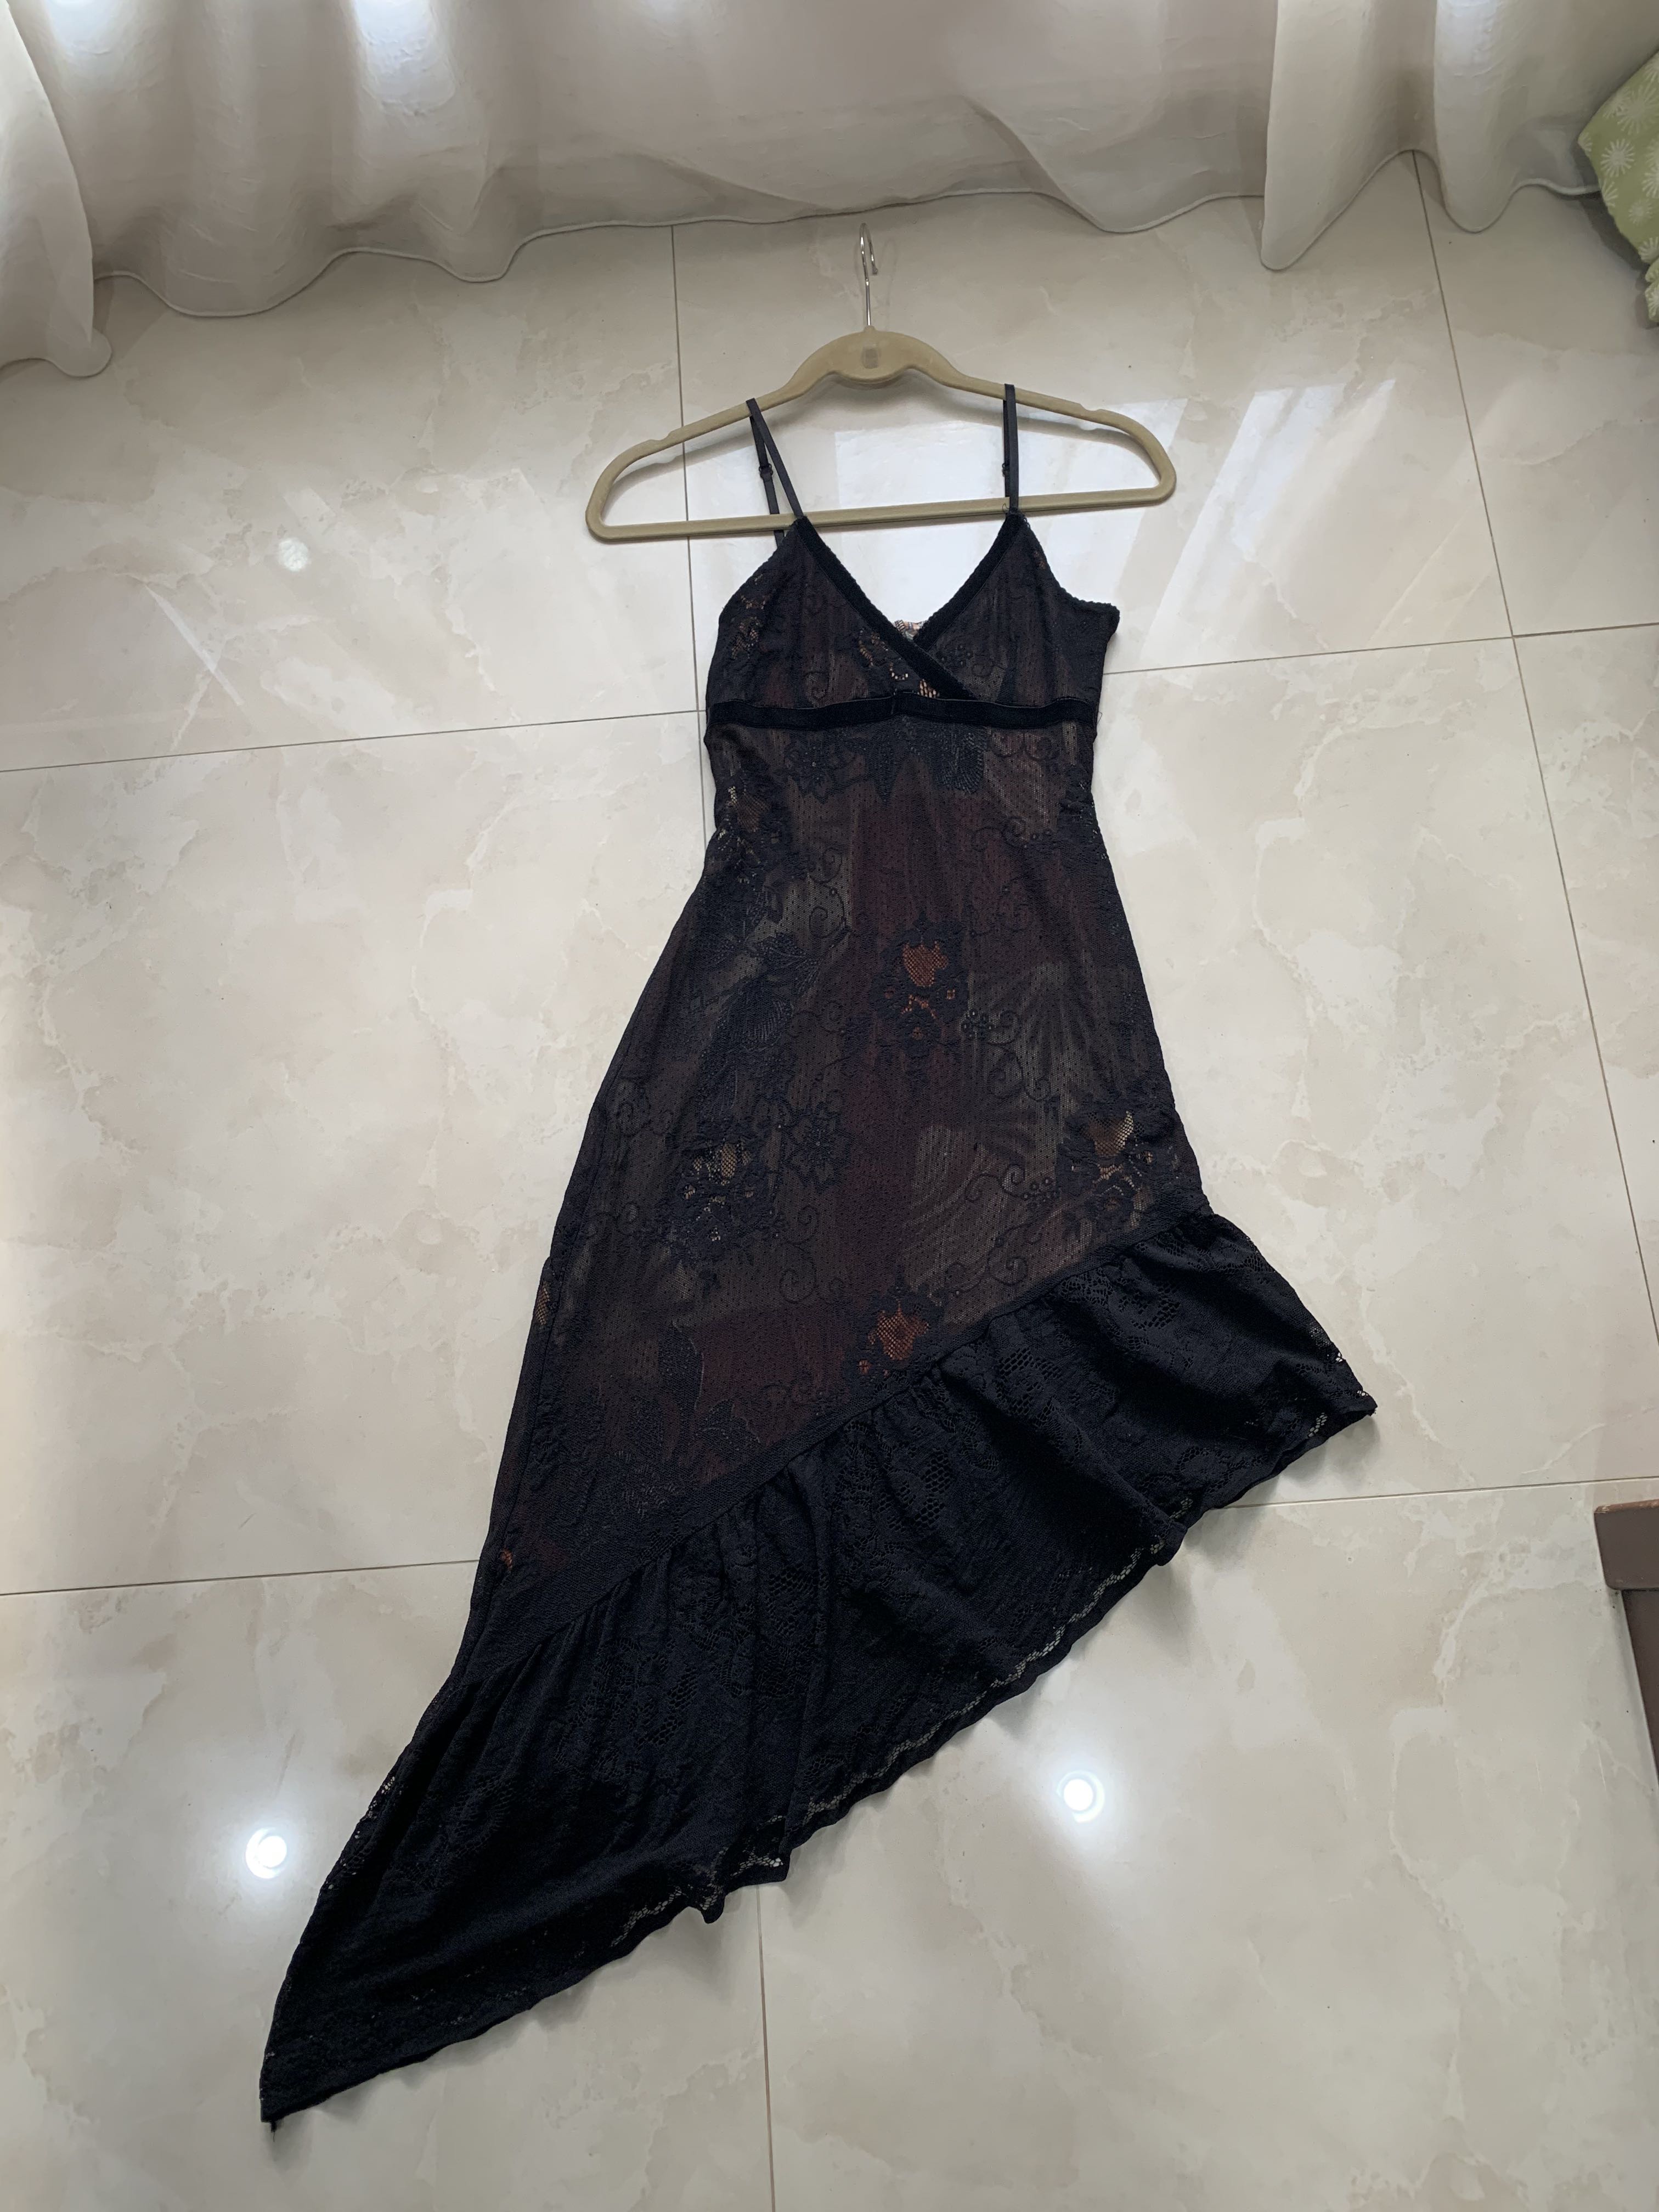 Bebe Black Lace Dress Women S Fashion Clothes Dresses On Carousell